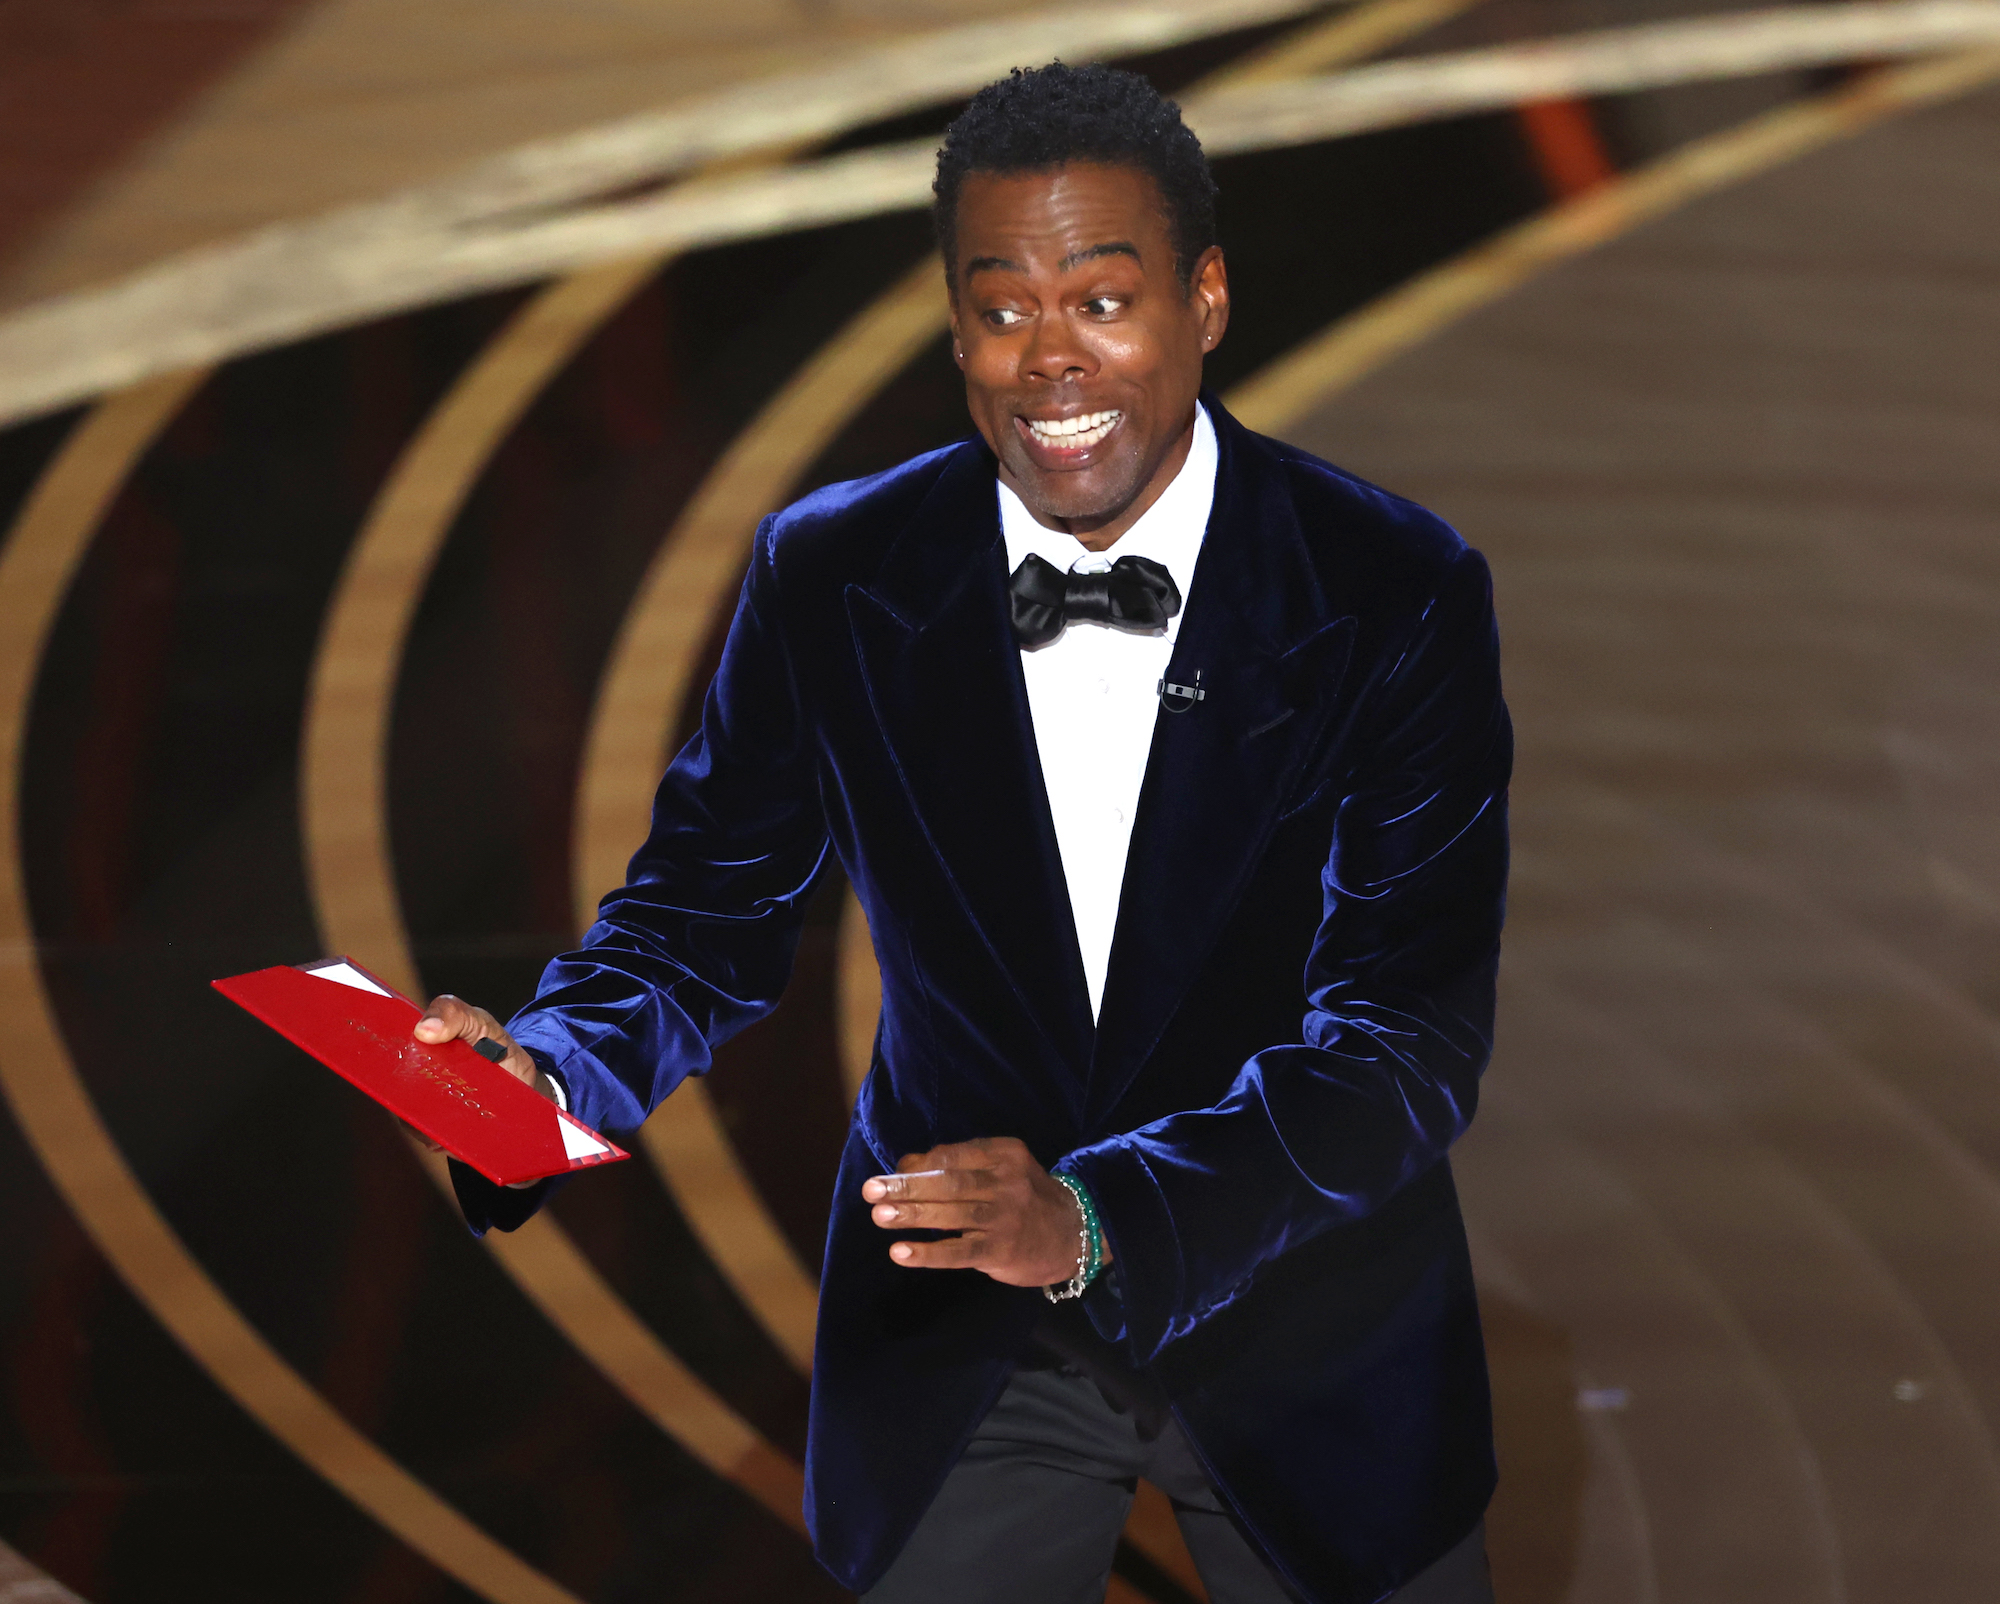 Chris Rock recovers from Will Smith slap at the Oscars